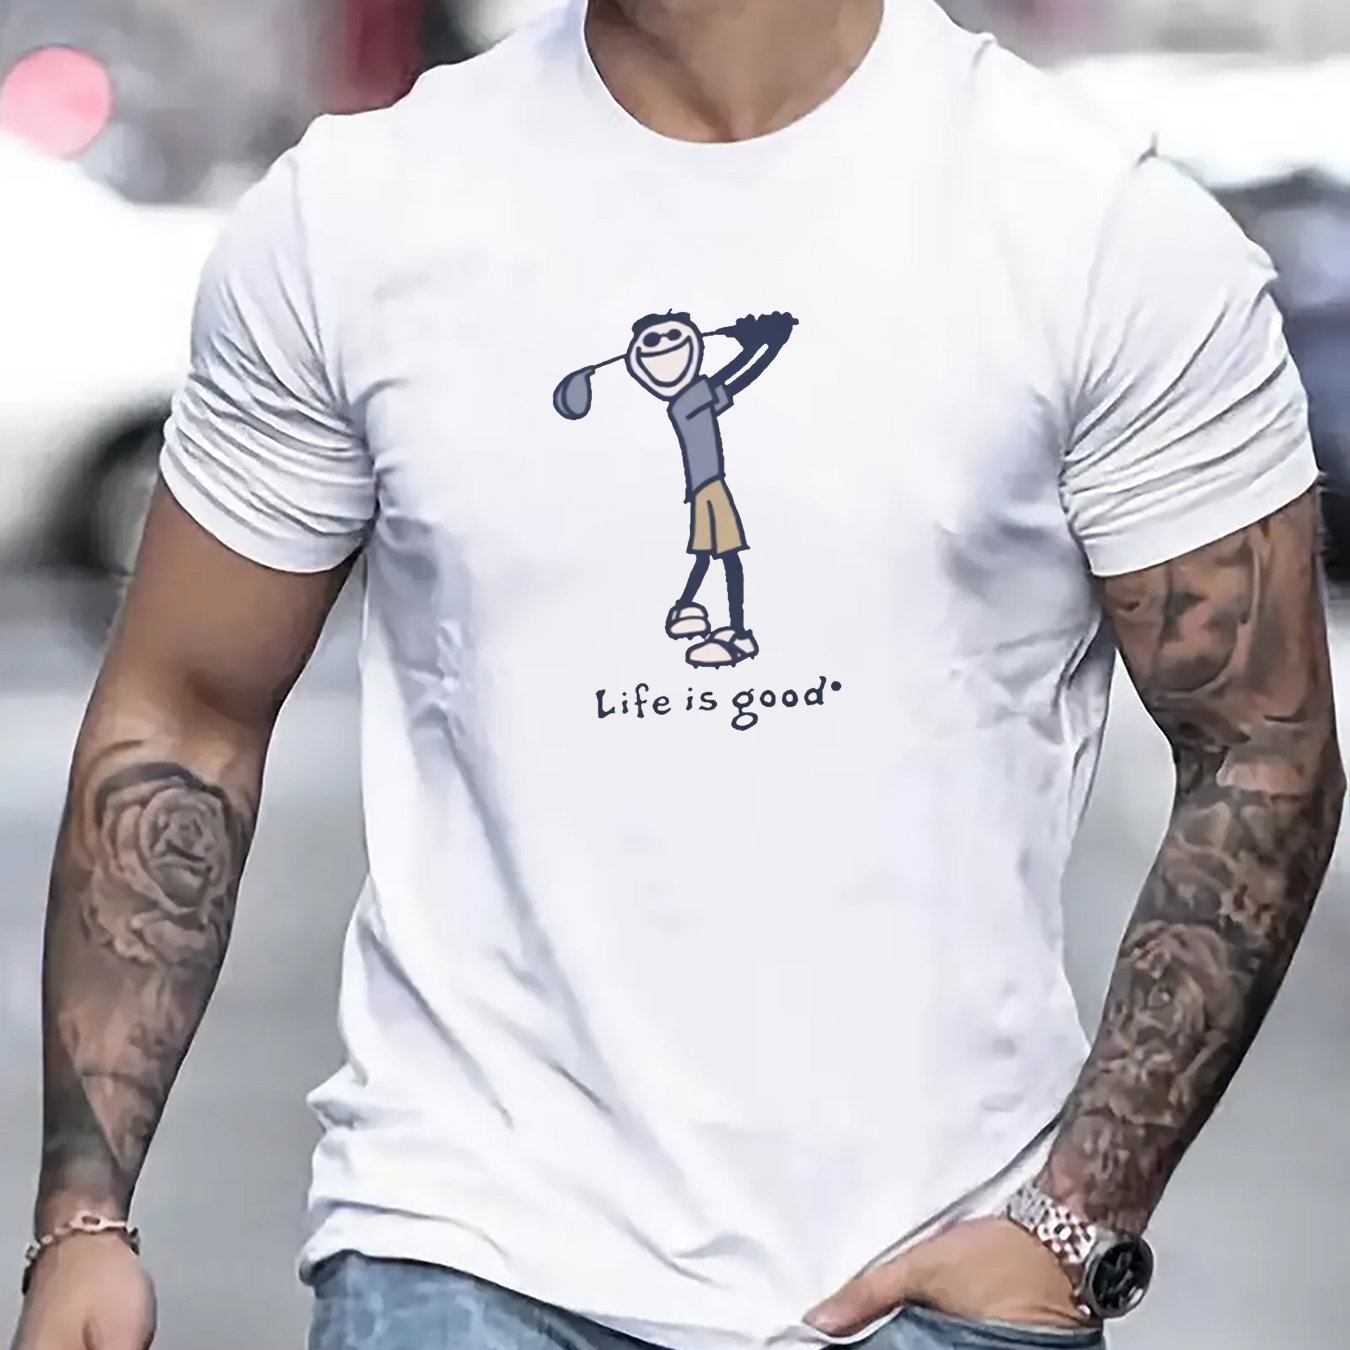 Life Is Good Print T Shirt, Tees For Men, Casual Short Sleeve T-shirt For Summer